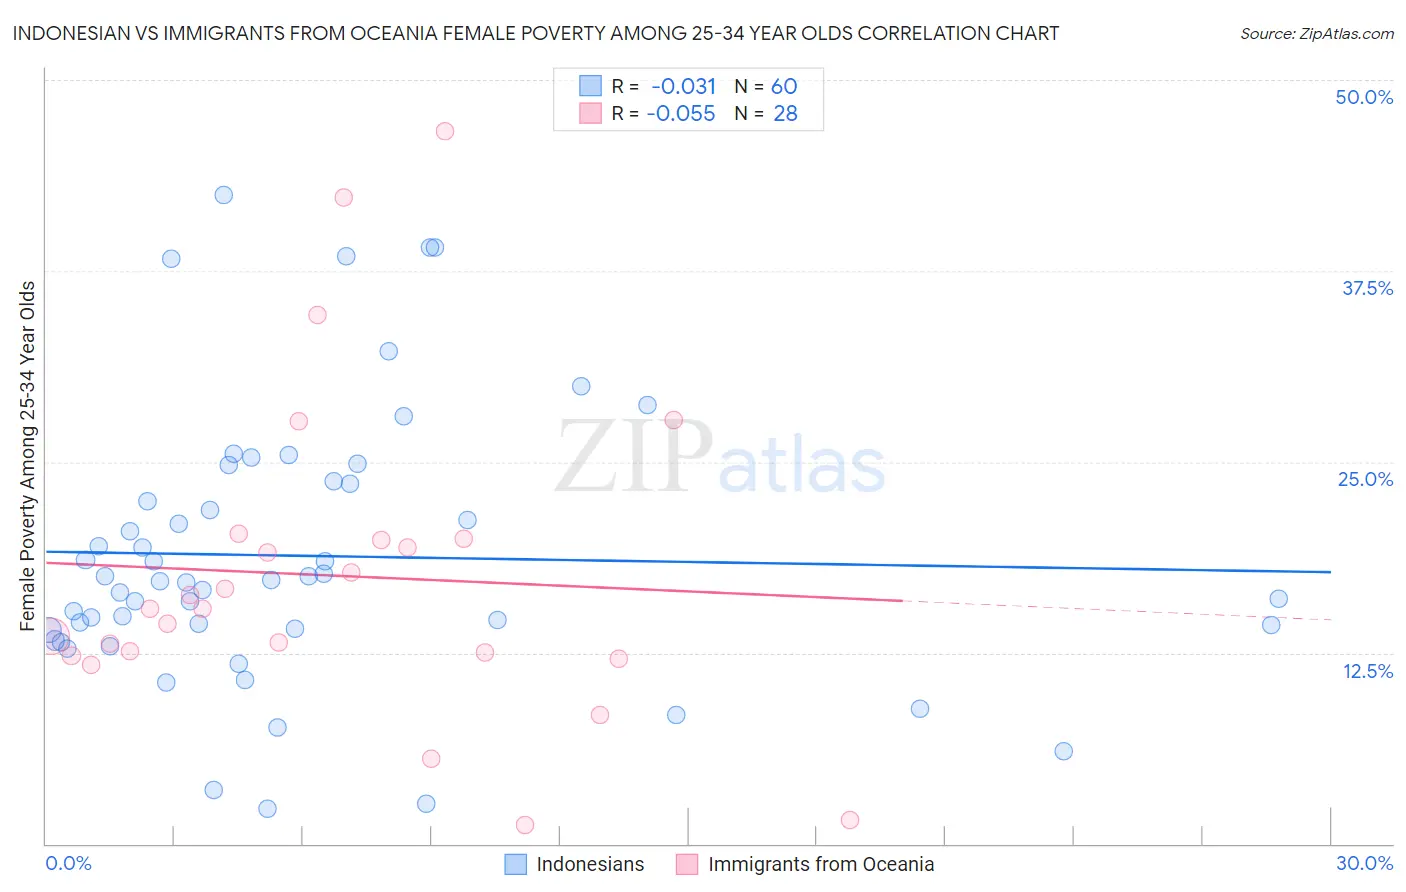 Indonesian vs Immigrants from Oceania Female Poverty Among 25-34 Year Olds